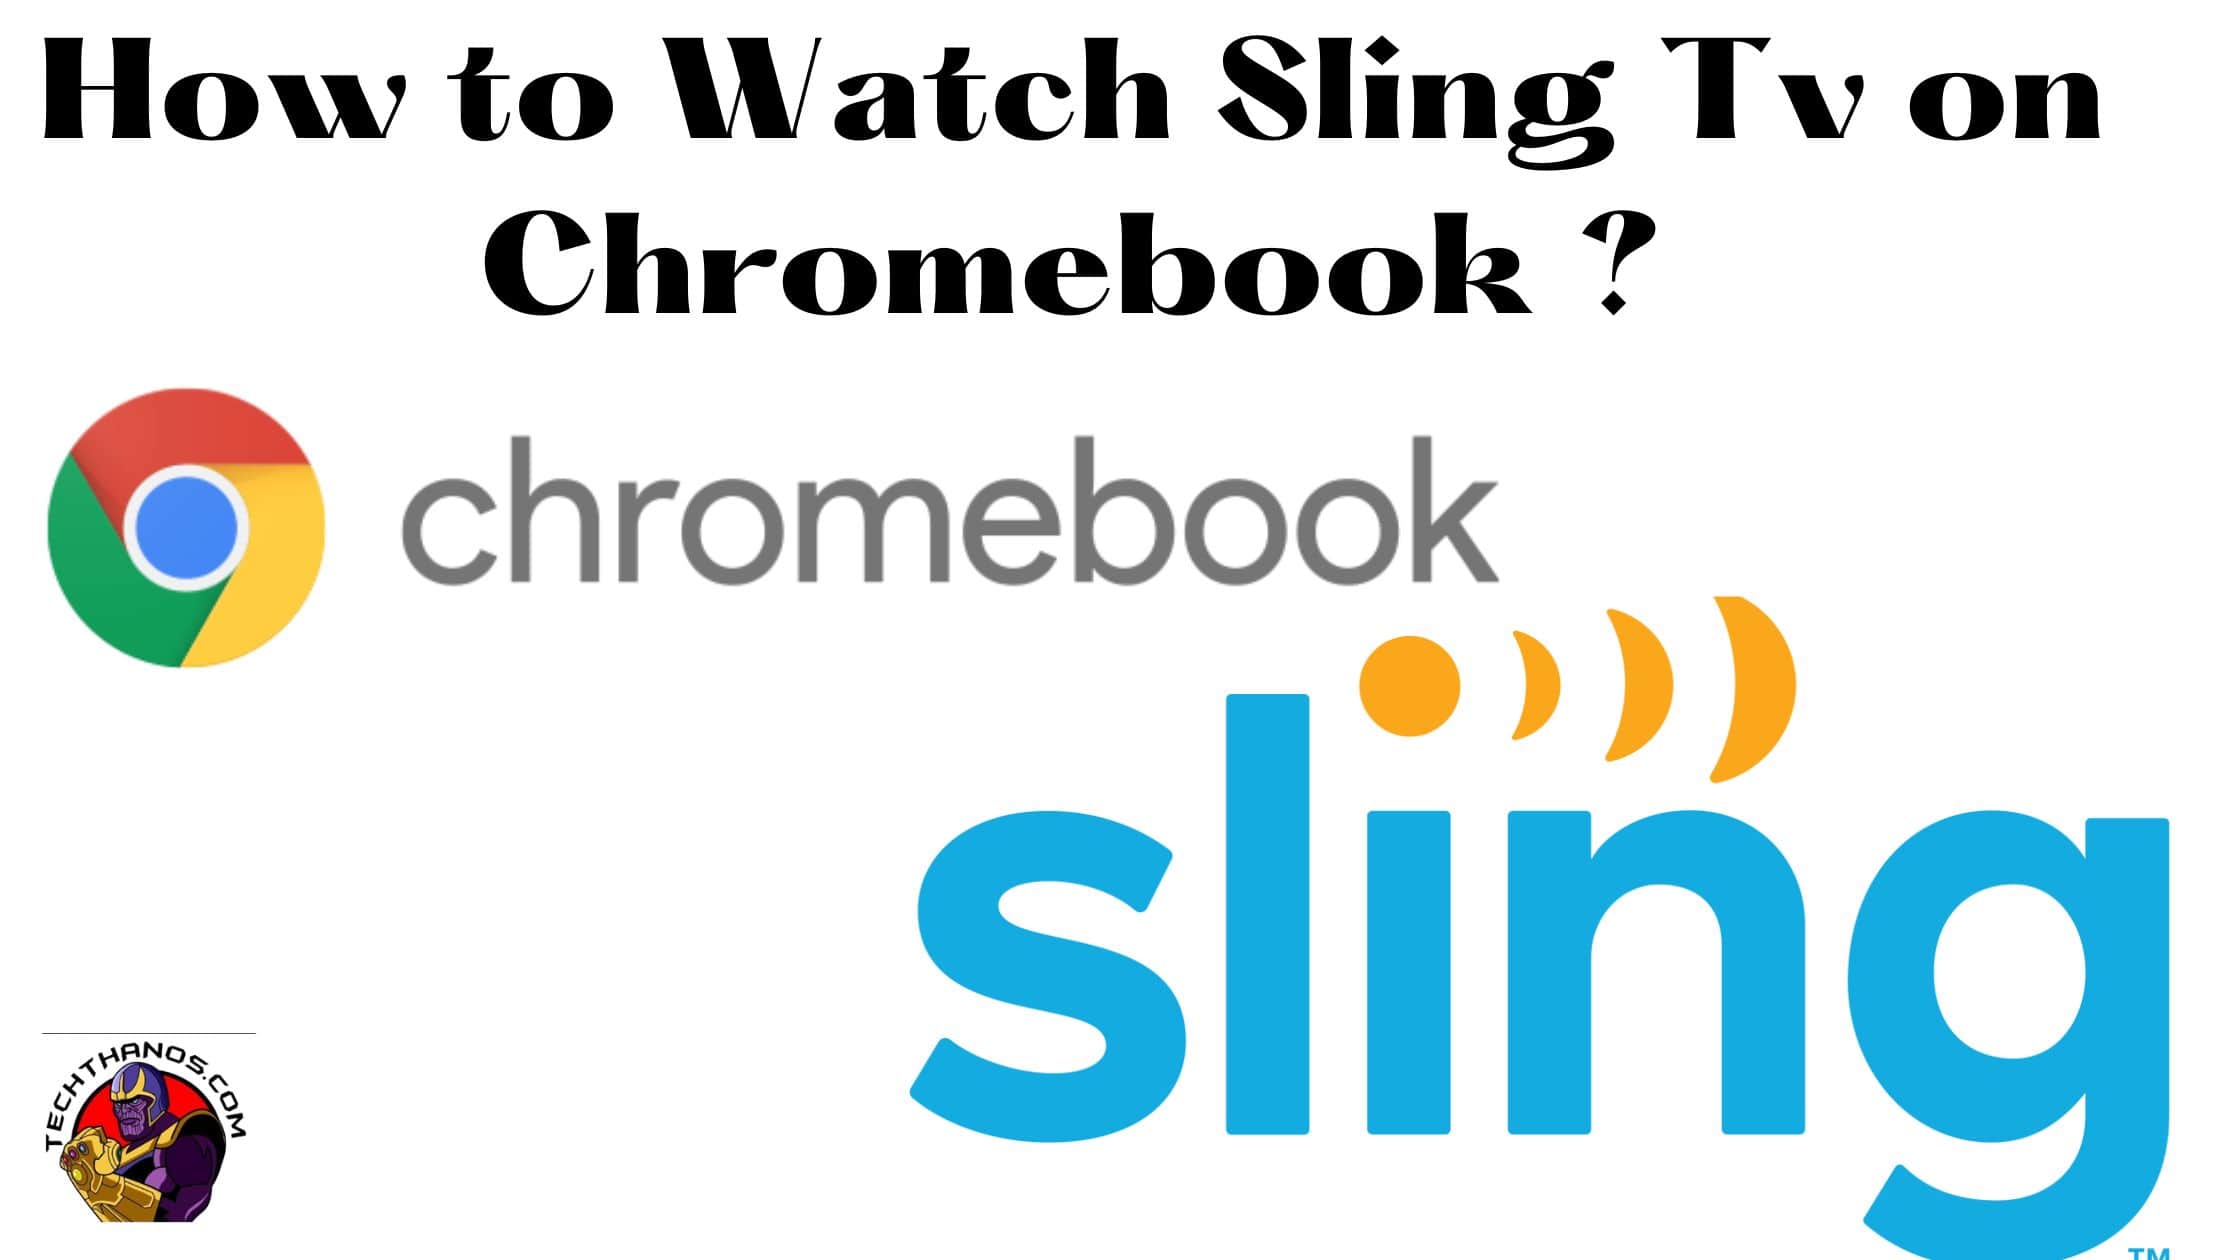 How to Watch Sling Tv on Chromebook